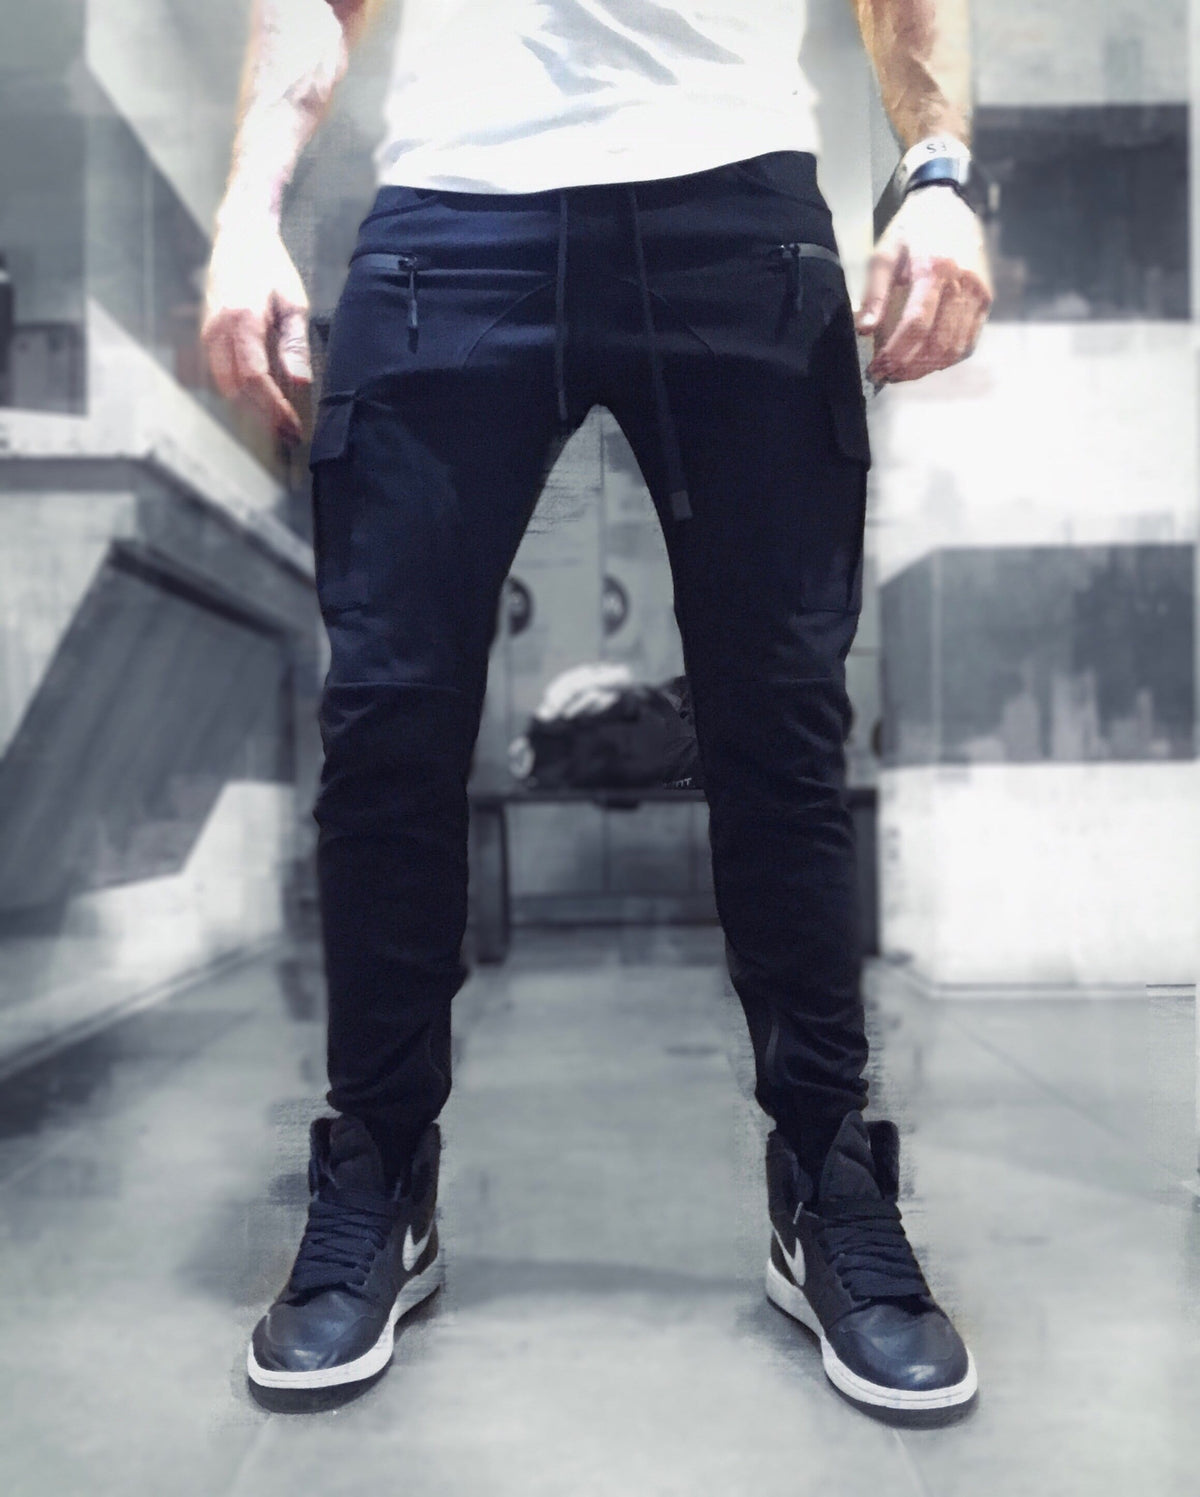 DSDNT Tactical Joggers Black - DISSIDENT GYM WEAR